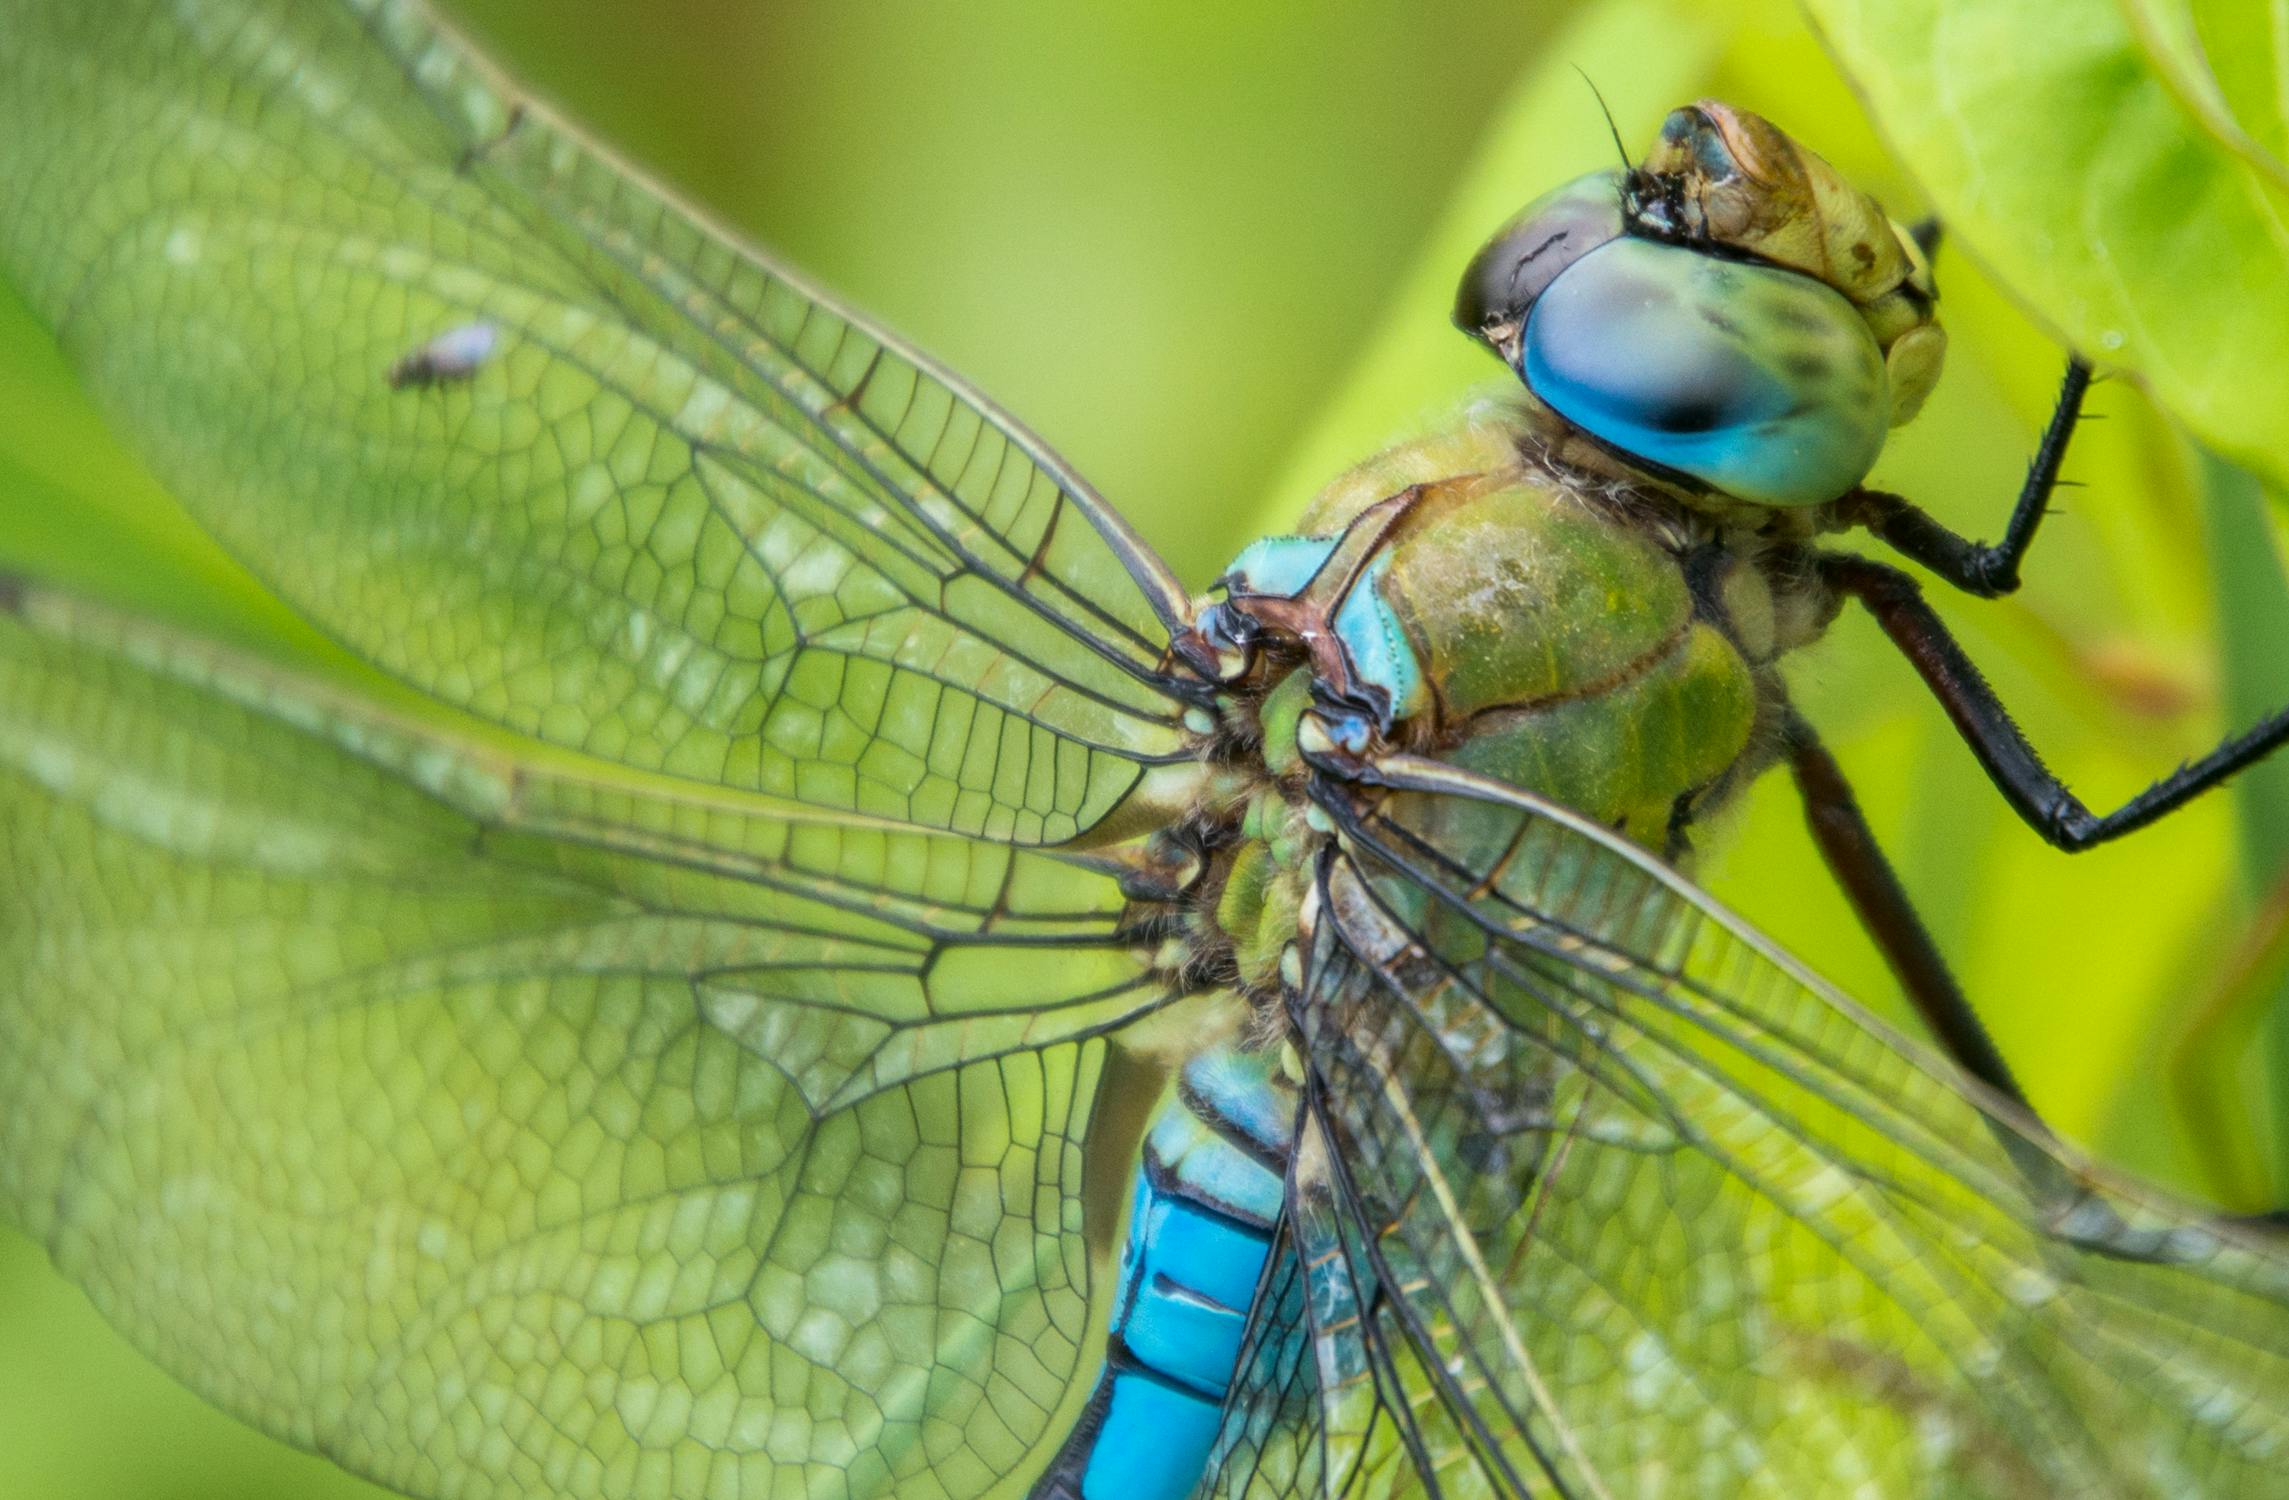 free-stock-photo-of-close-up-dragonfly-dragonfly-close-up